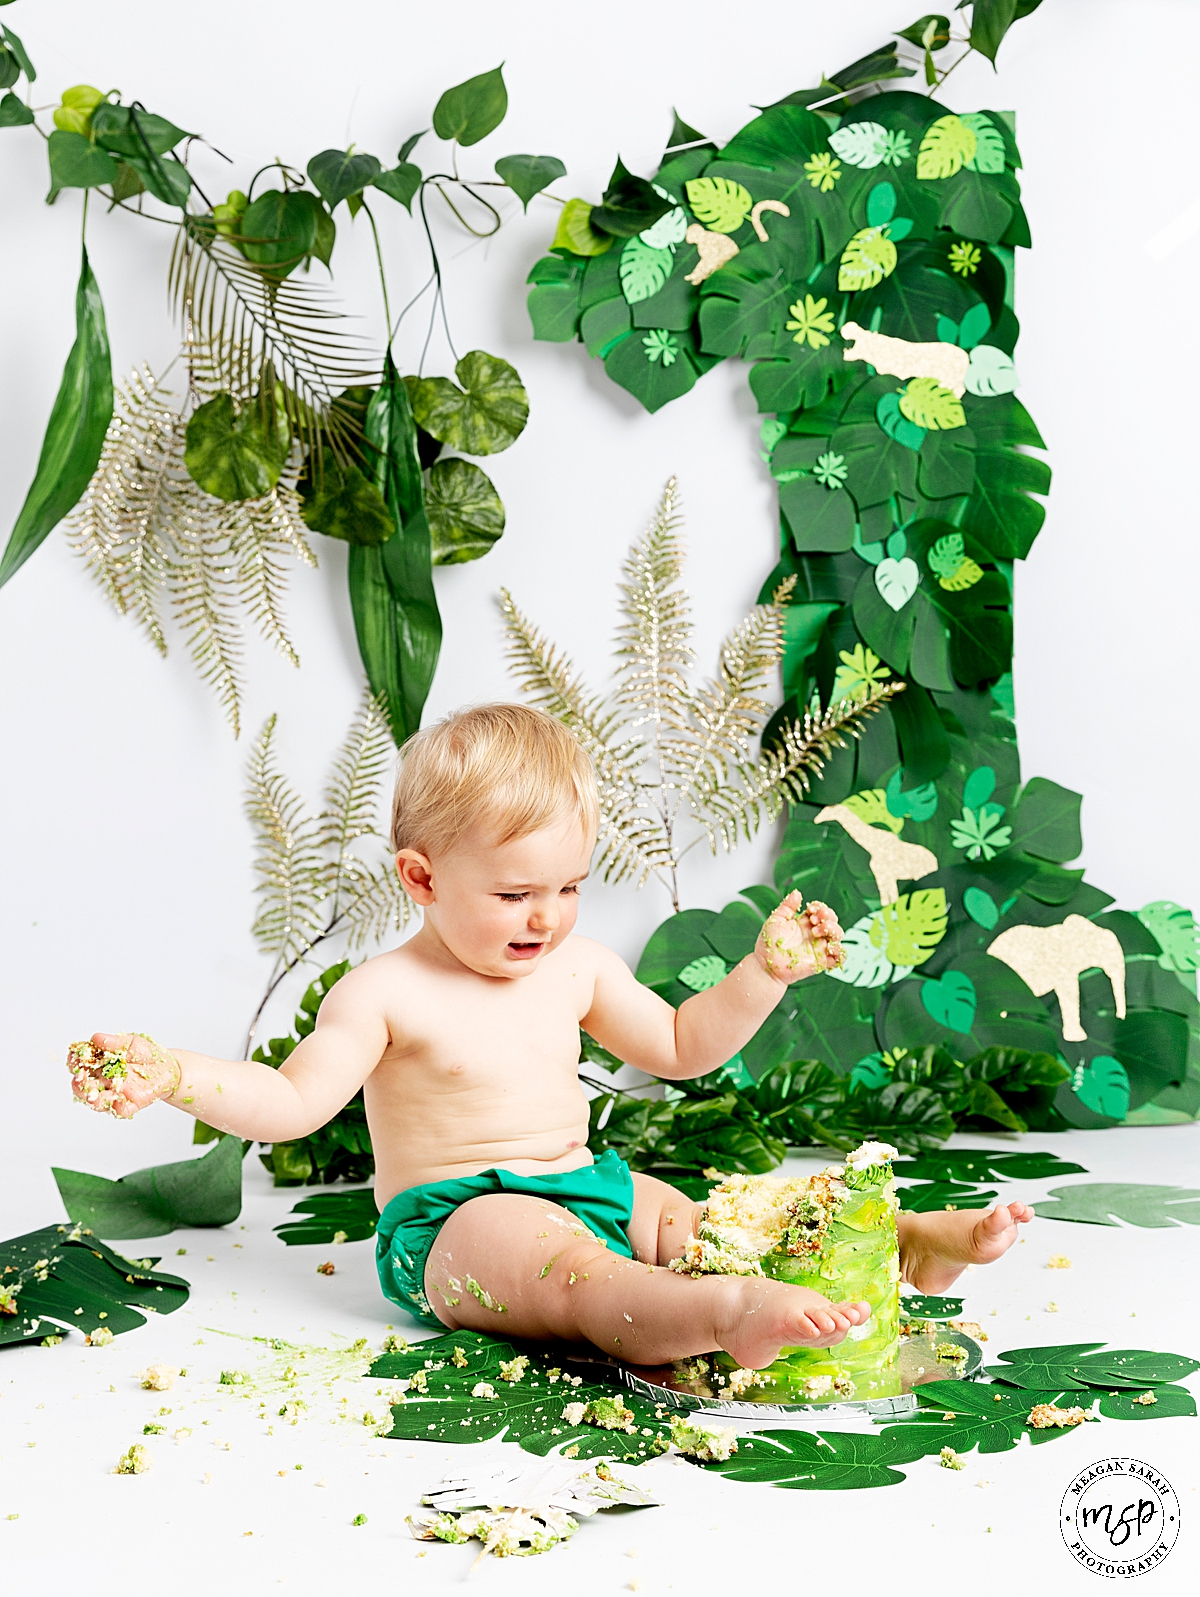 West Yorkshire,Funny,Studio photographer,Studio,Professional,Photography,Photographer,Meagan Sarah Photography,High Key,High End,Beautiful Photography,Children Photographer,1st Birthday,Cake,First Birthday,Fun,Happy Birthday,Jungle theme,Minimal,Modern,Simple,Things to do with a toddler,White background,Leeds,Horsforth,Sugar crush bakes,Displaylady,